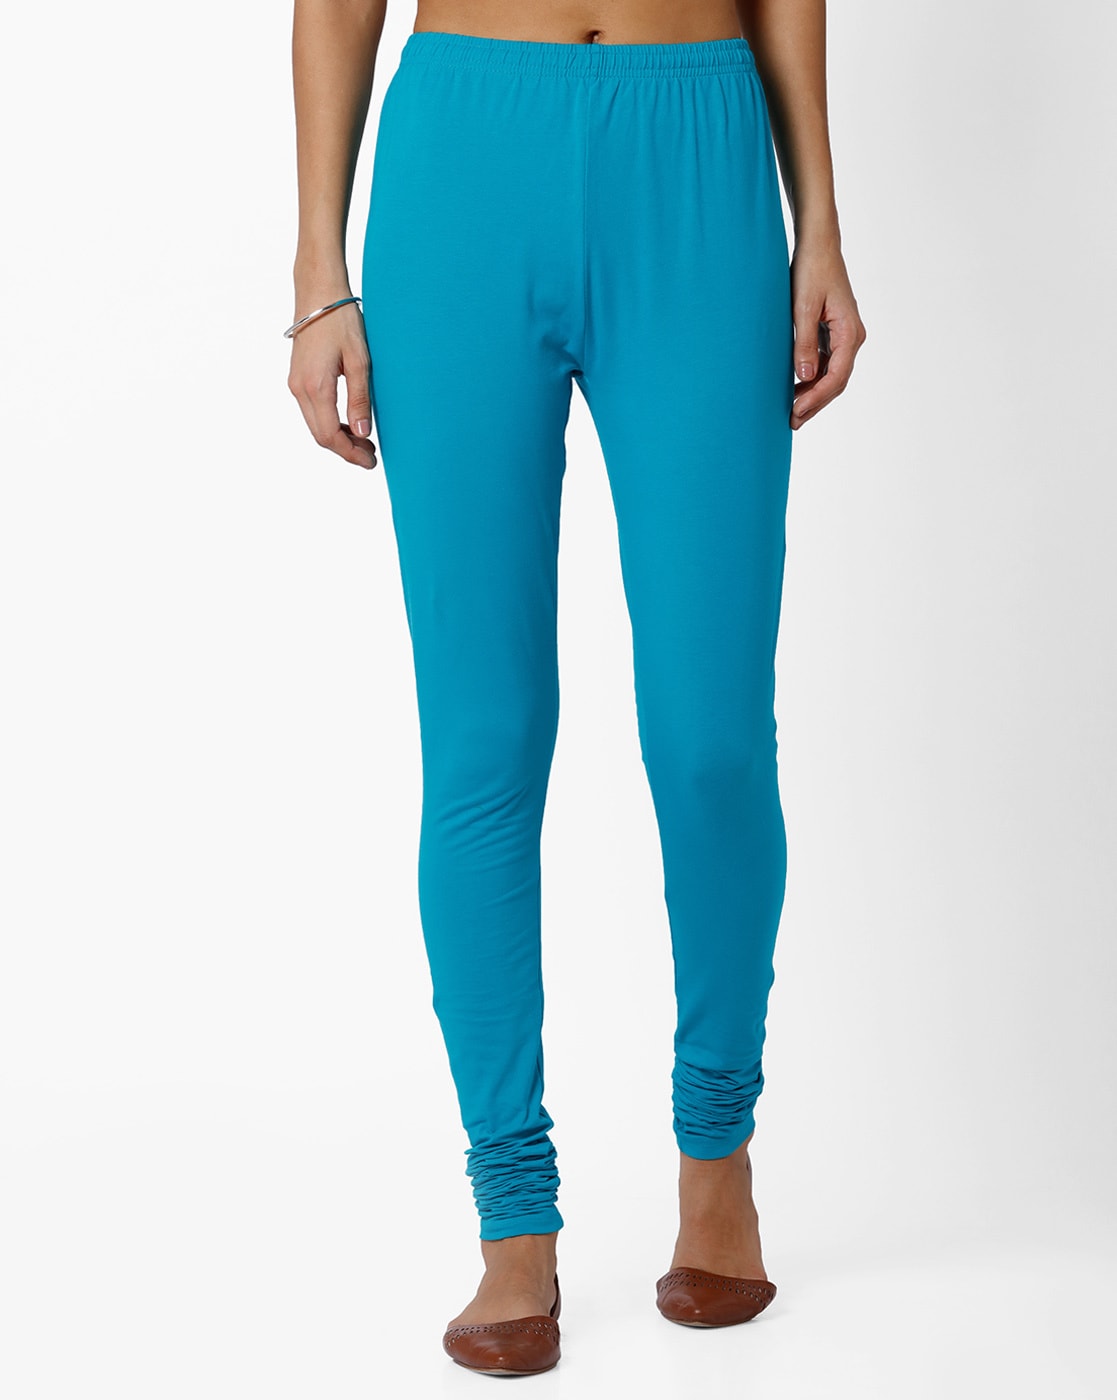 Buy Turquoise Blue Leggings for Women by AVAASA MIX N' MATCH Online